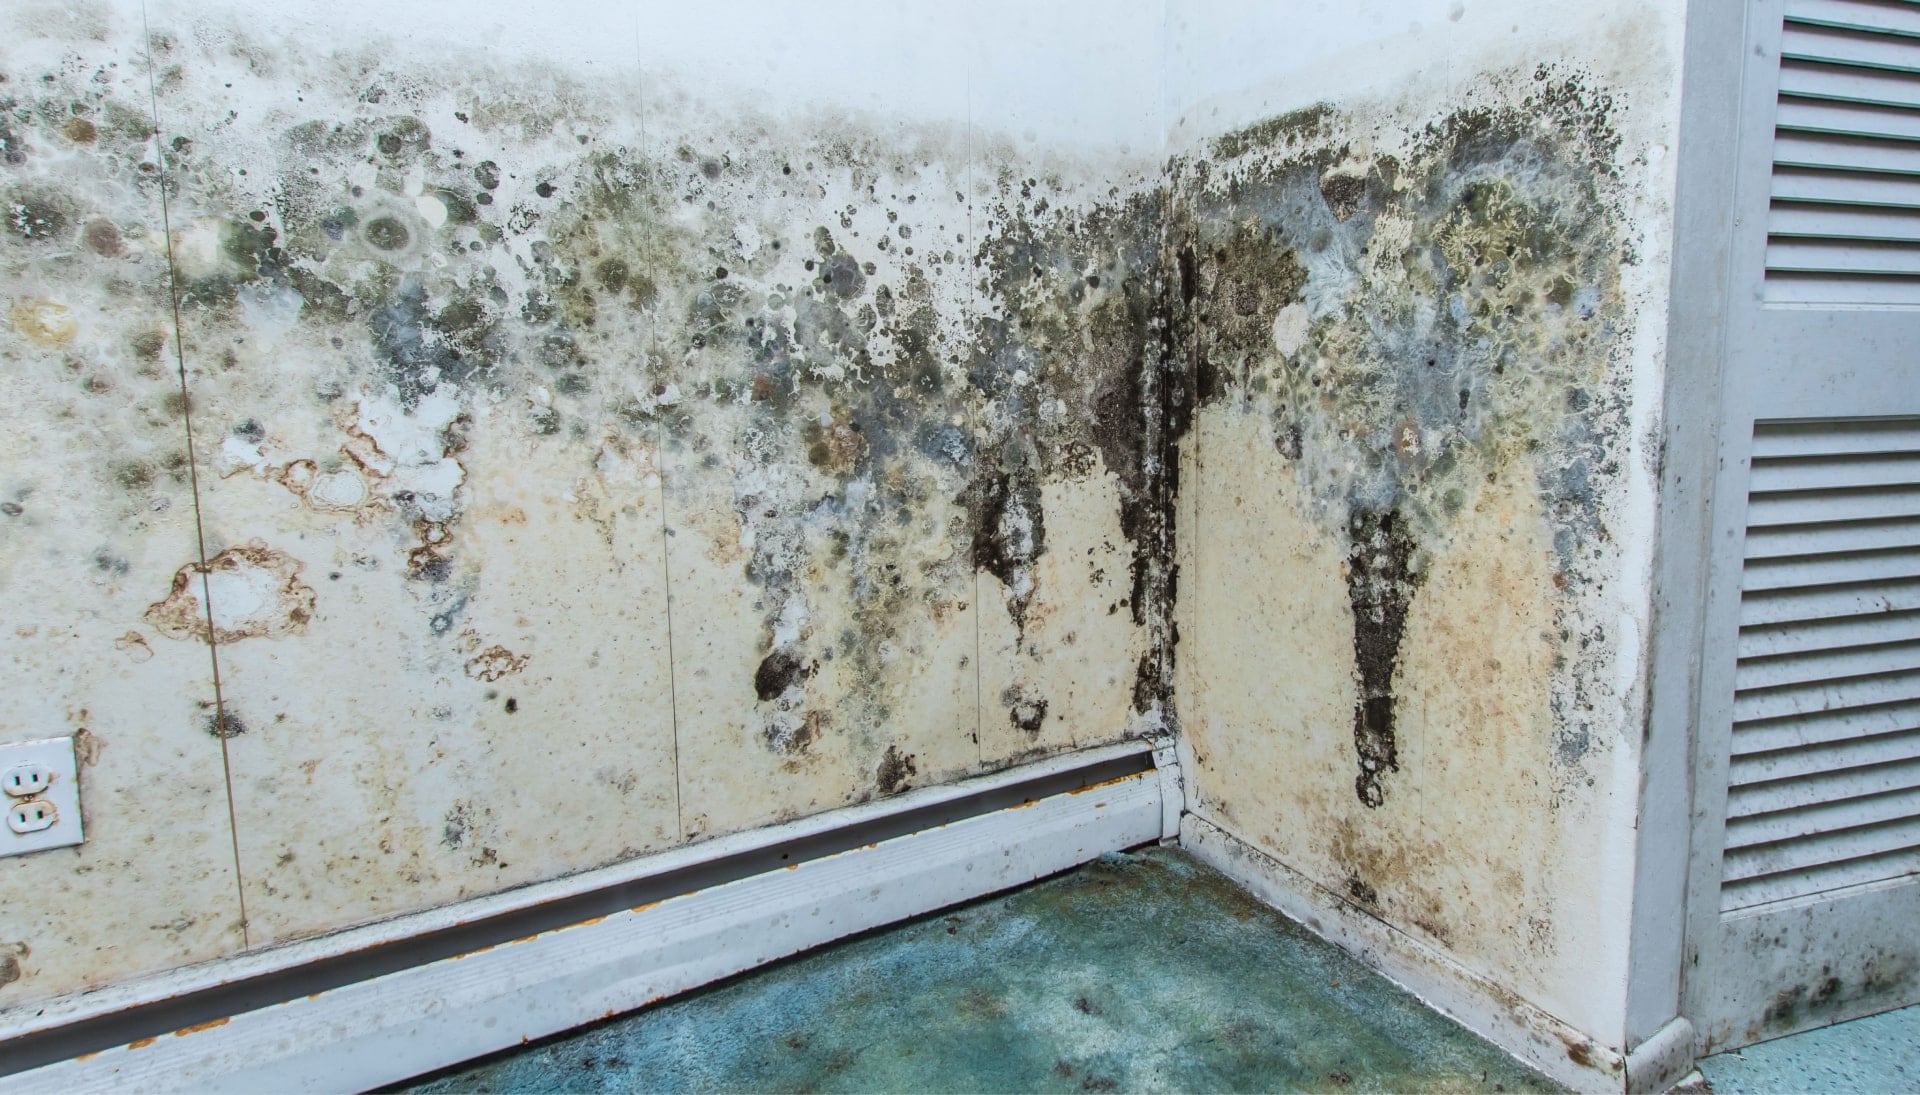 Black mold forming on walls.